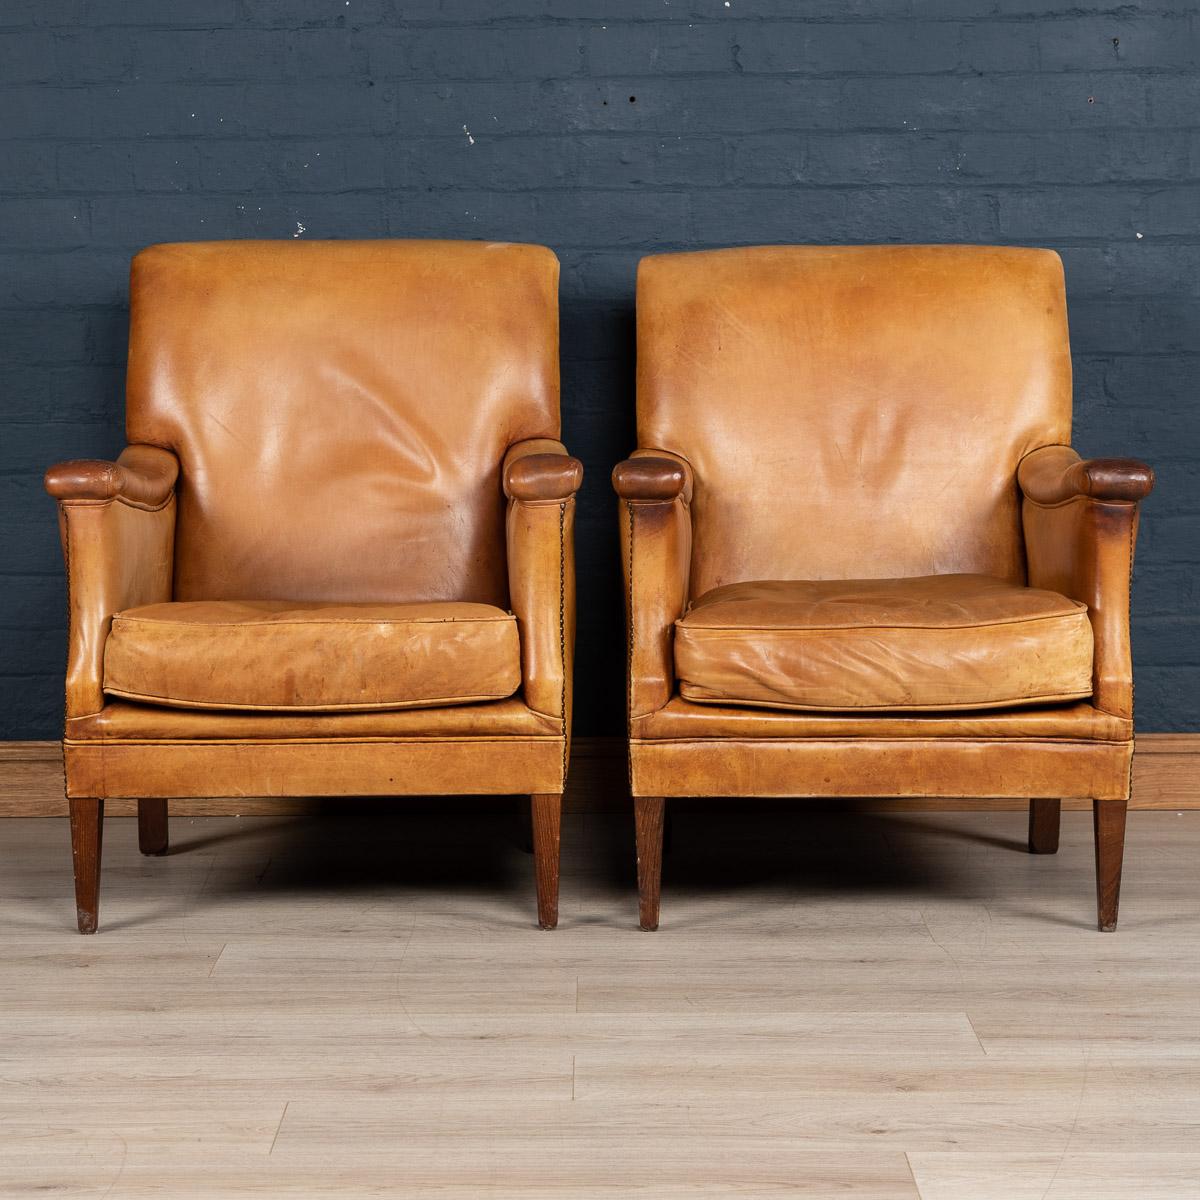 Showing superb patina and color, this wonderful pair of club chairs were hand upholstered sheepskin leather in Holland by the finest craftsmen. Fantastic look for any interior, both modern and traditional.

   